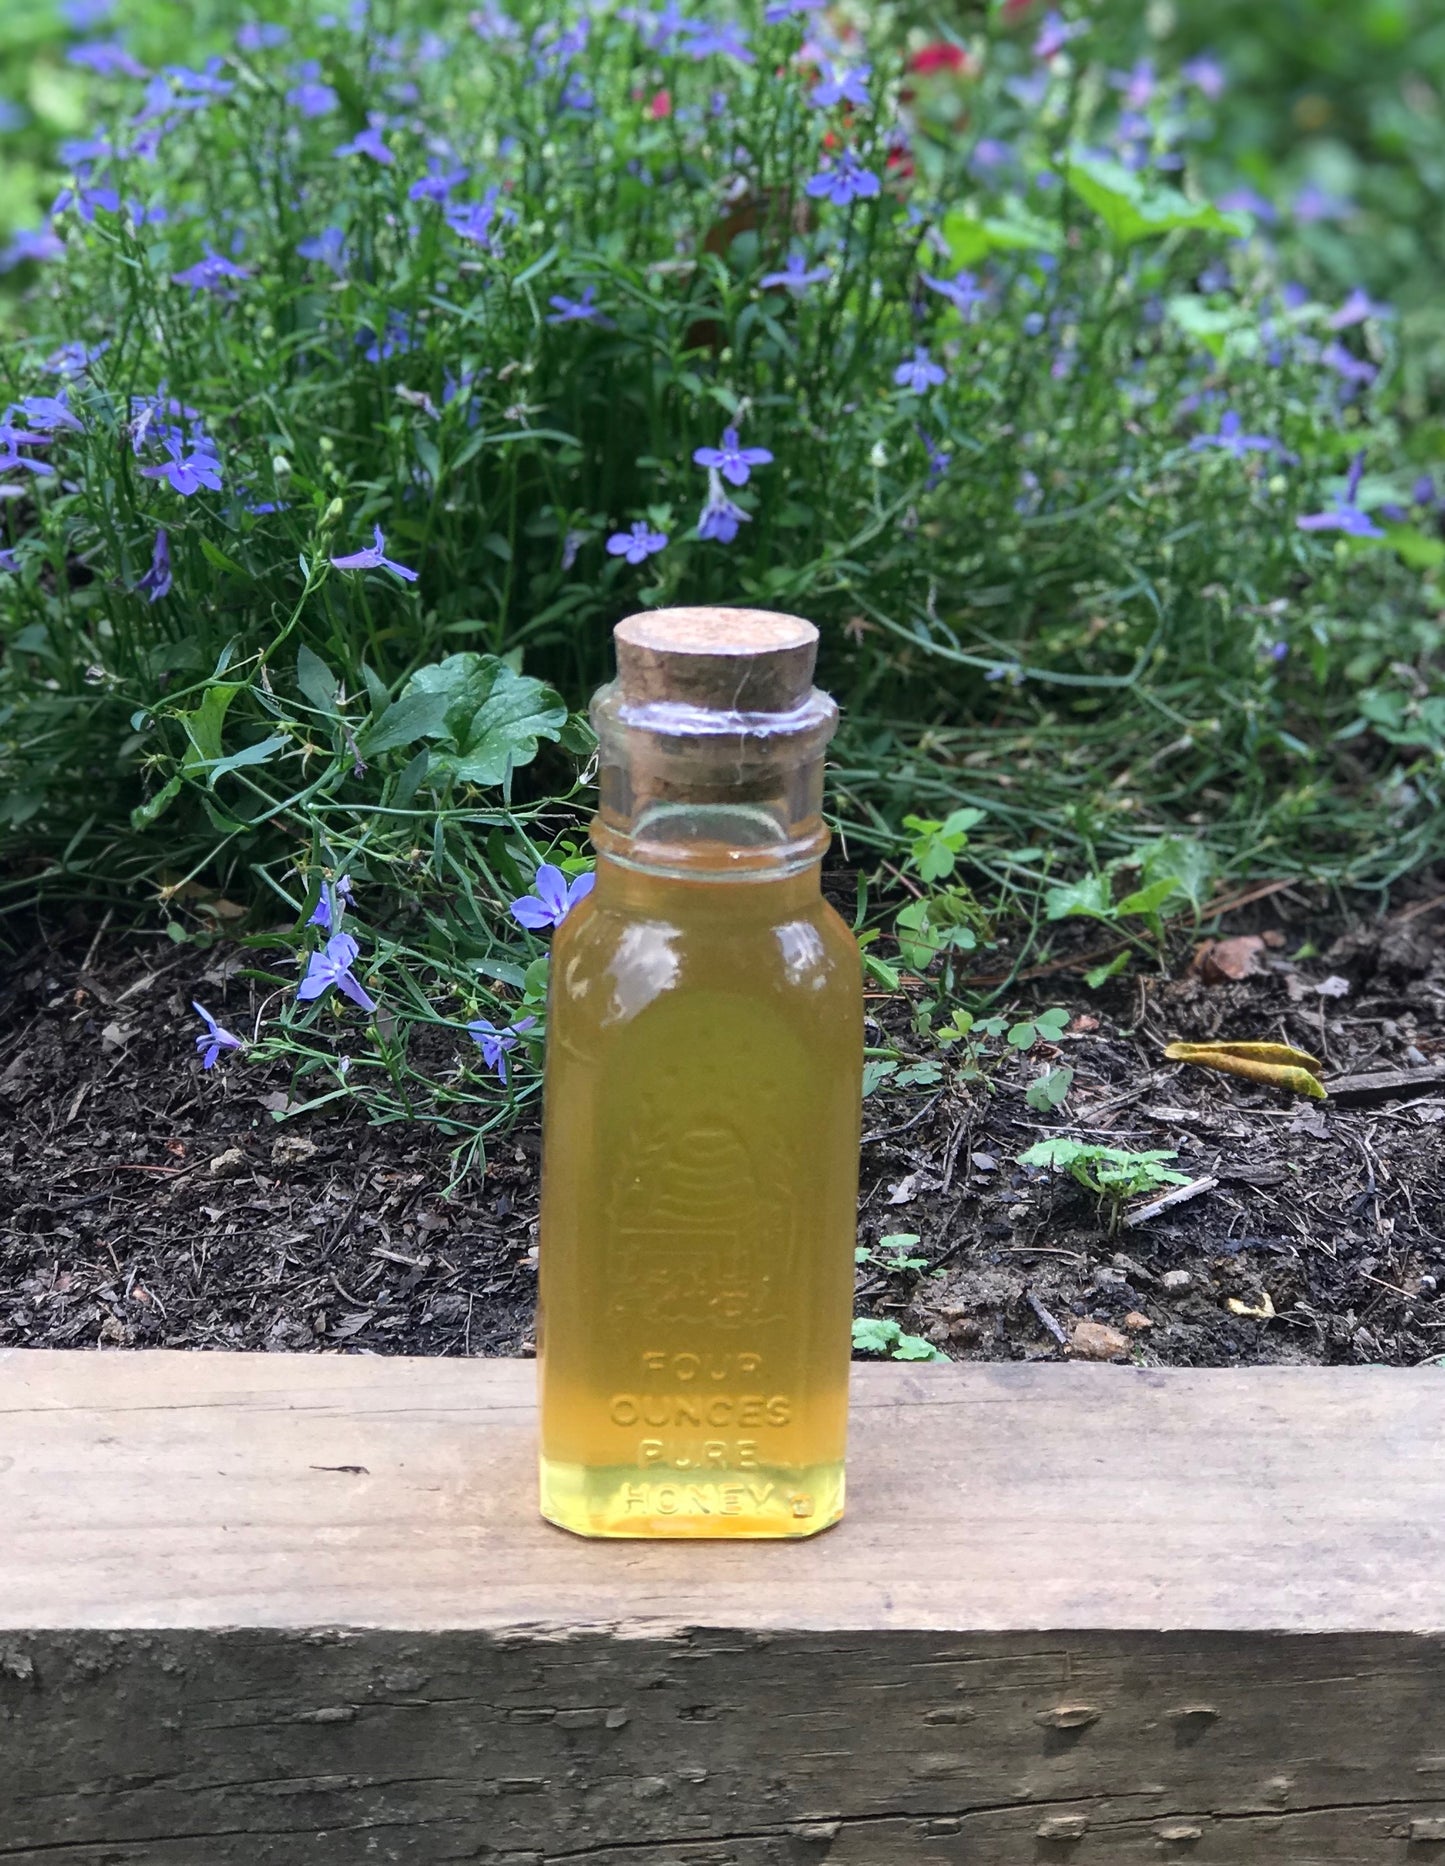 Spring Honey from Old City in a Muth Bottle